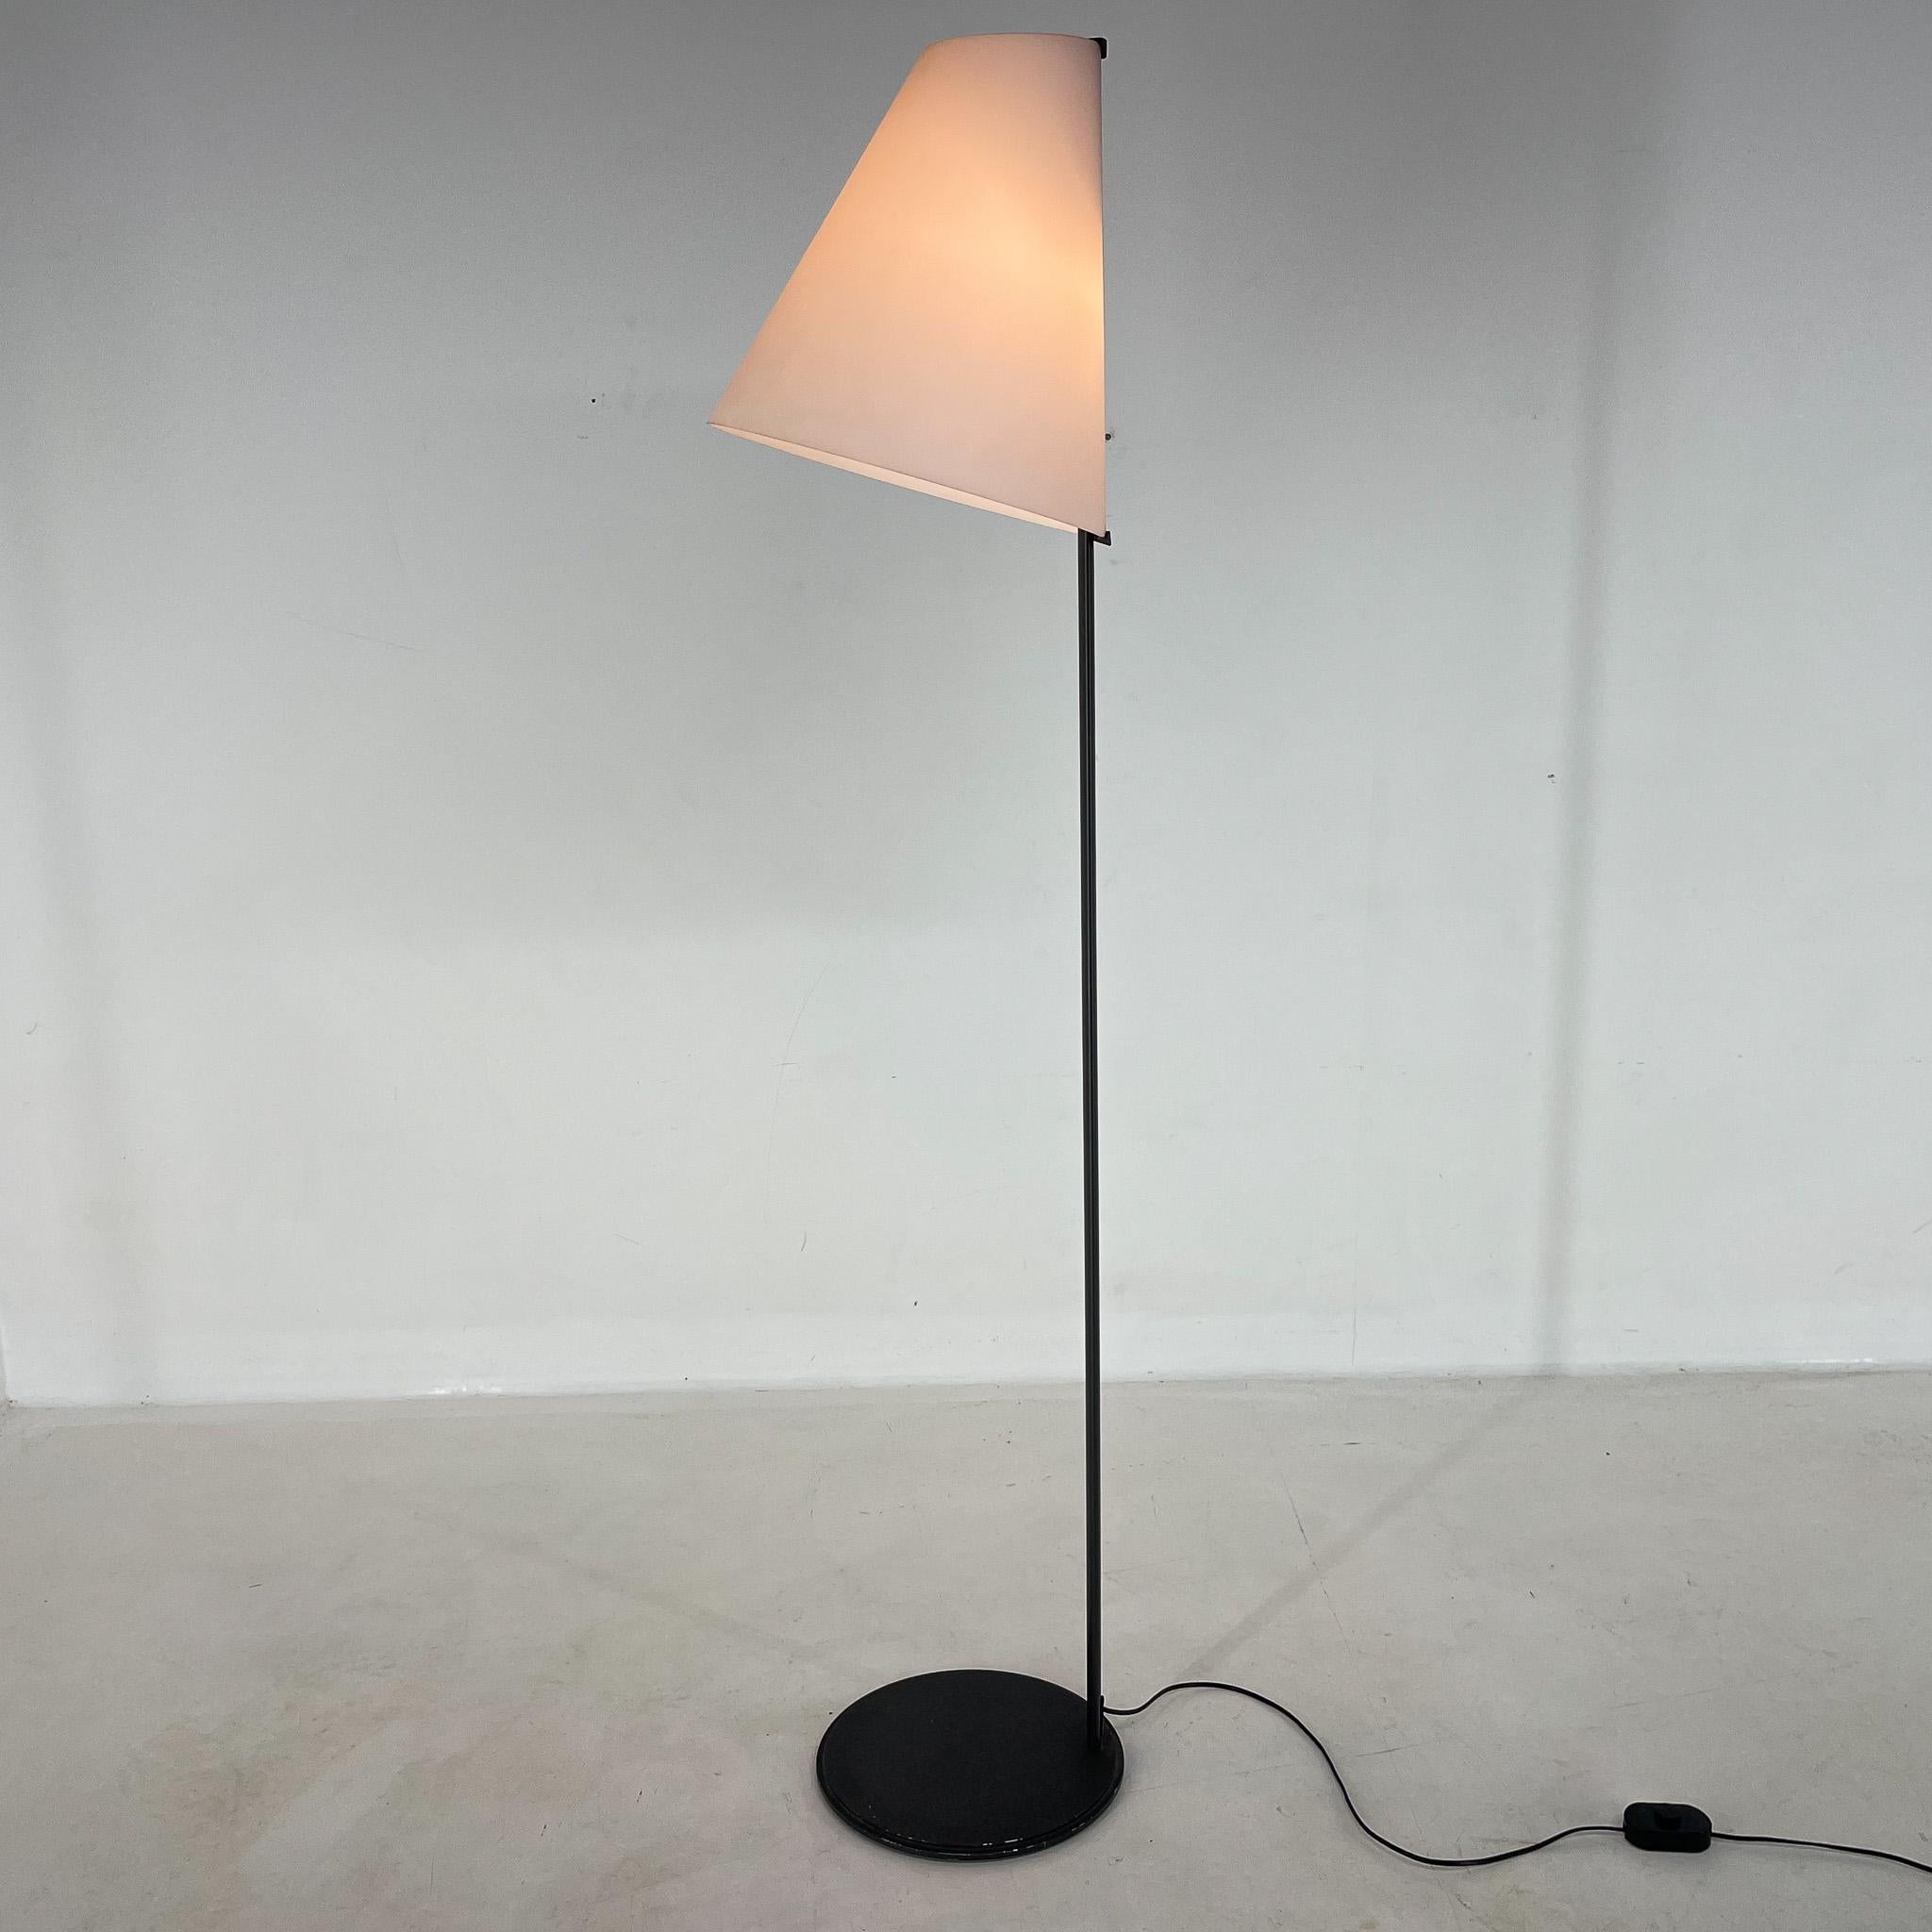 This beatiful lamp was designed by the founders of Leucos Renato Toso and Giovanna Noti Massari in Italy in the 1980's. The lamp has black metal base and the lamp shade is made of white opaline glass with a slight pink tinge.